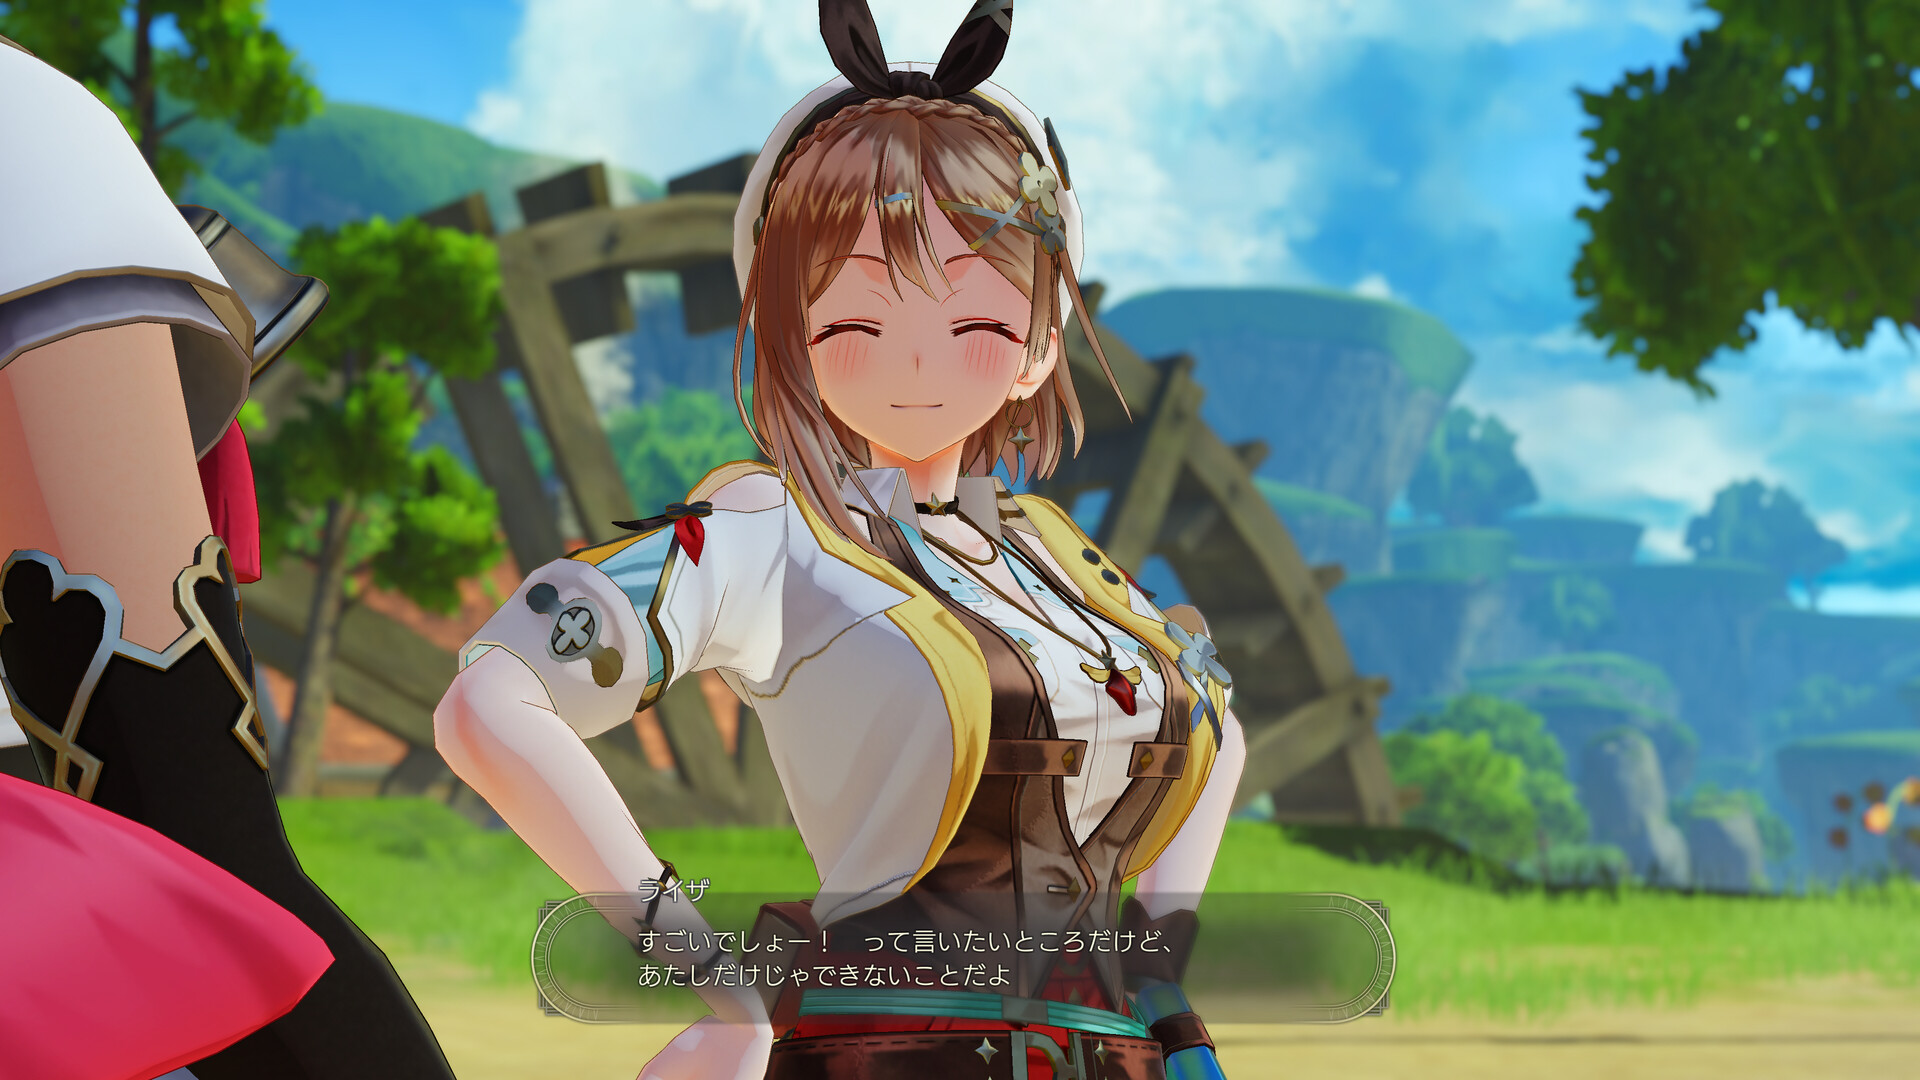 Find the best laptops for Atelier Ryza 3: Alchemist of the End & the Secret Key